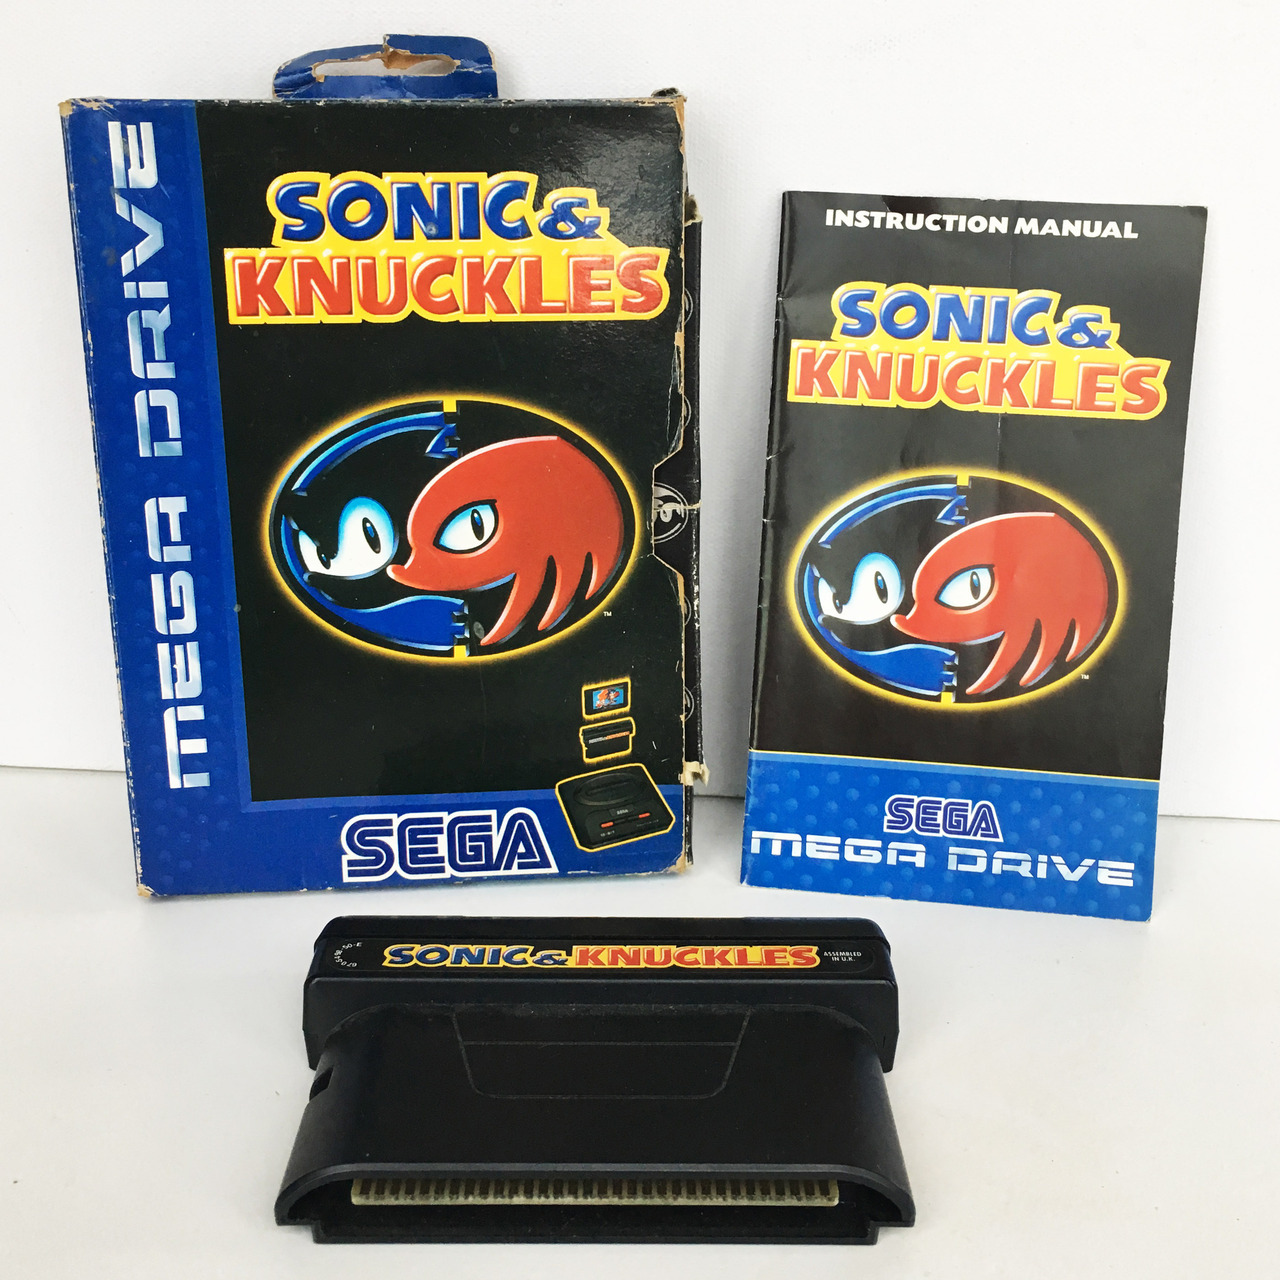 sonichedgeblog: ‘Sonic &amp; Knuckles’ was released on October 18th, 1994